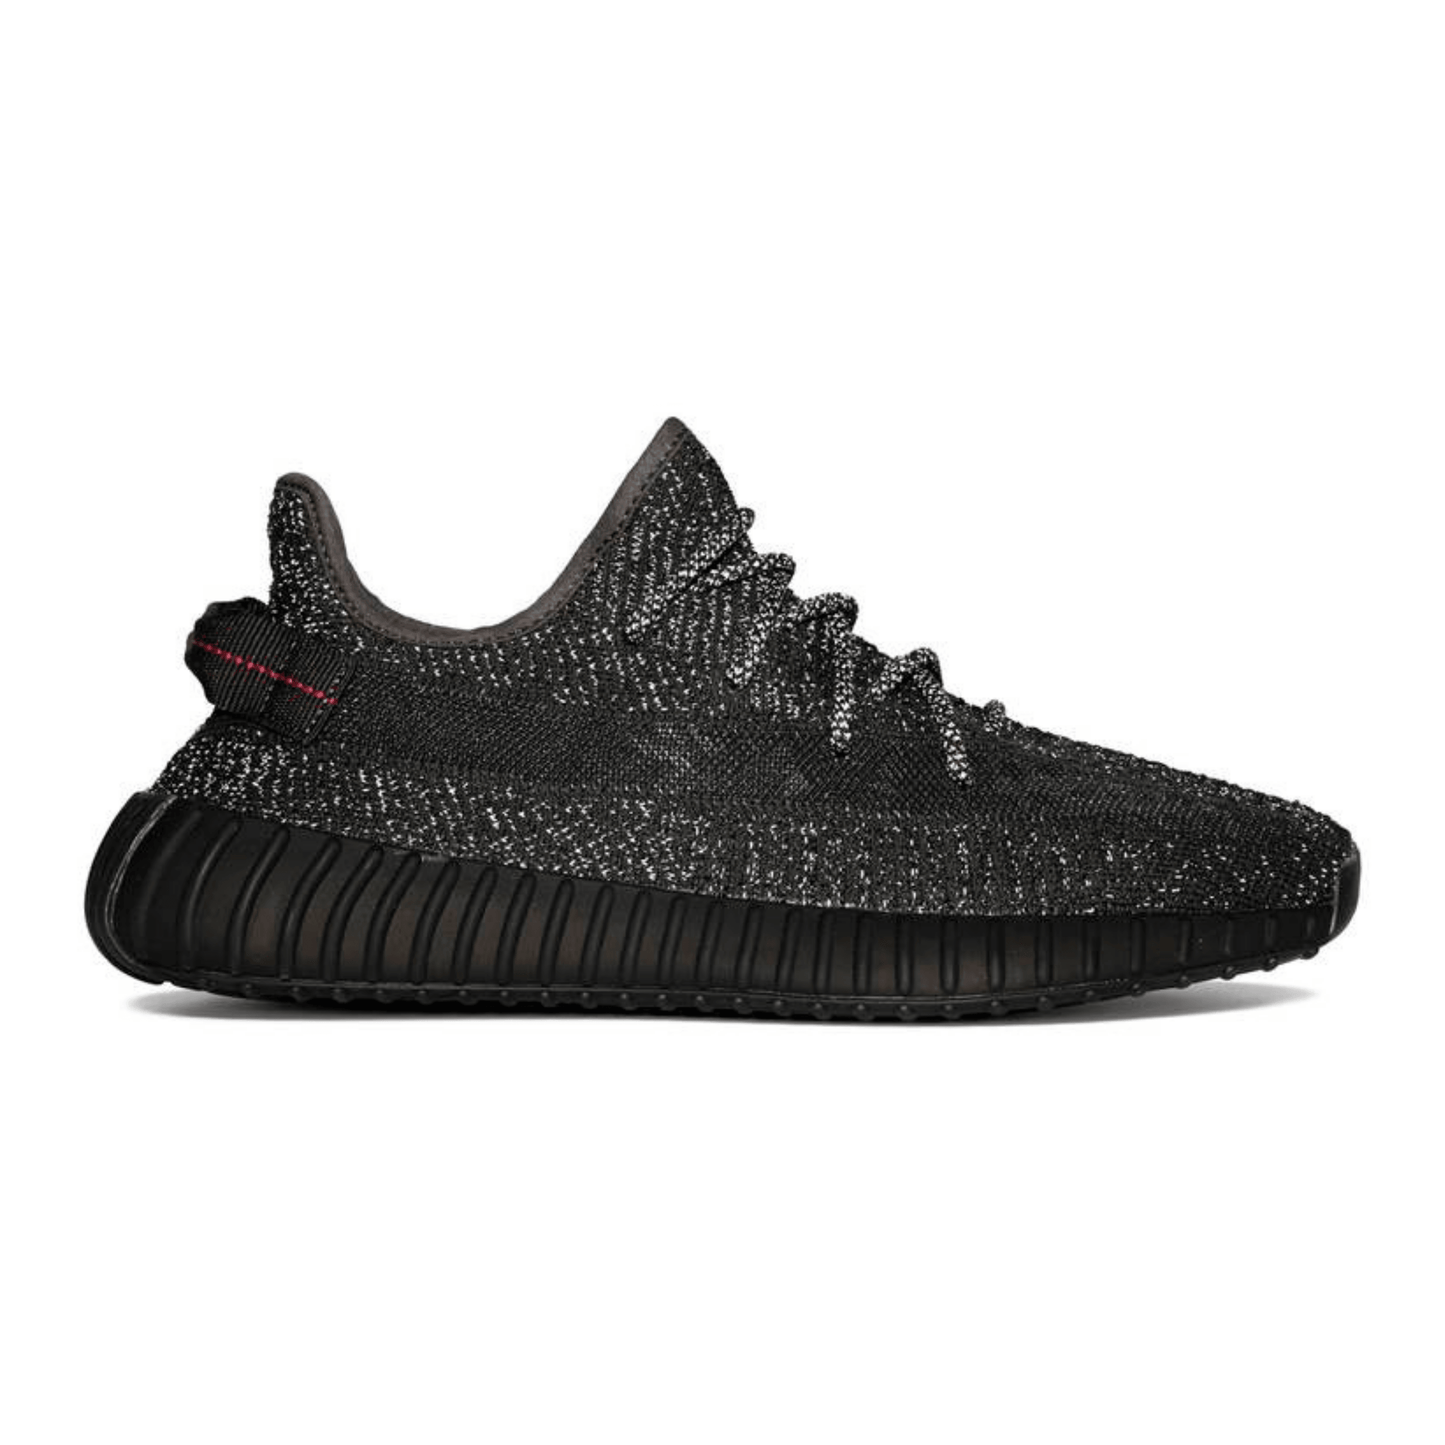 Yeezy Boost 350 V2 'Static Black’ (Reflective) - FRESNEAKERS